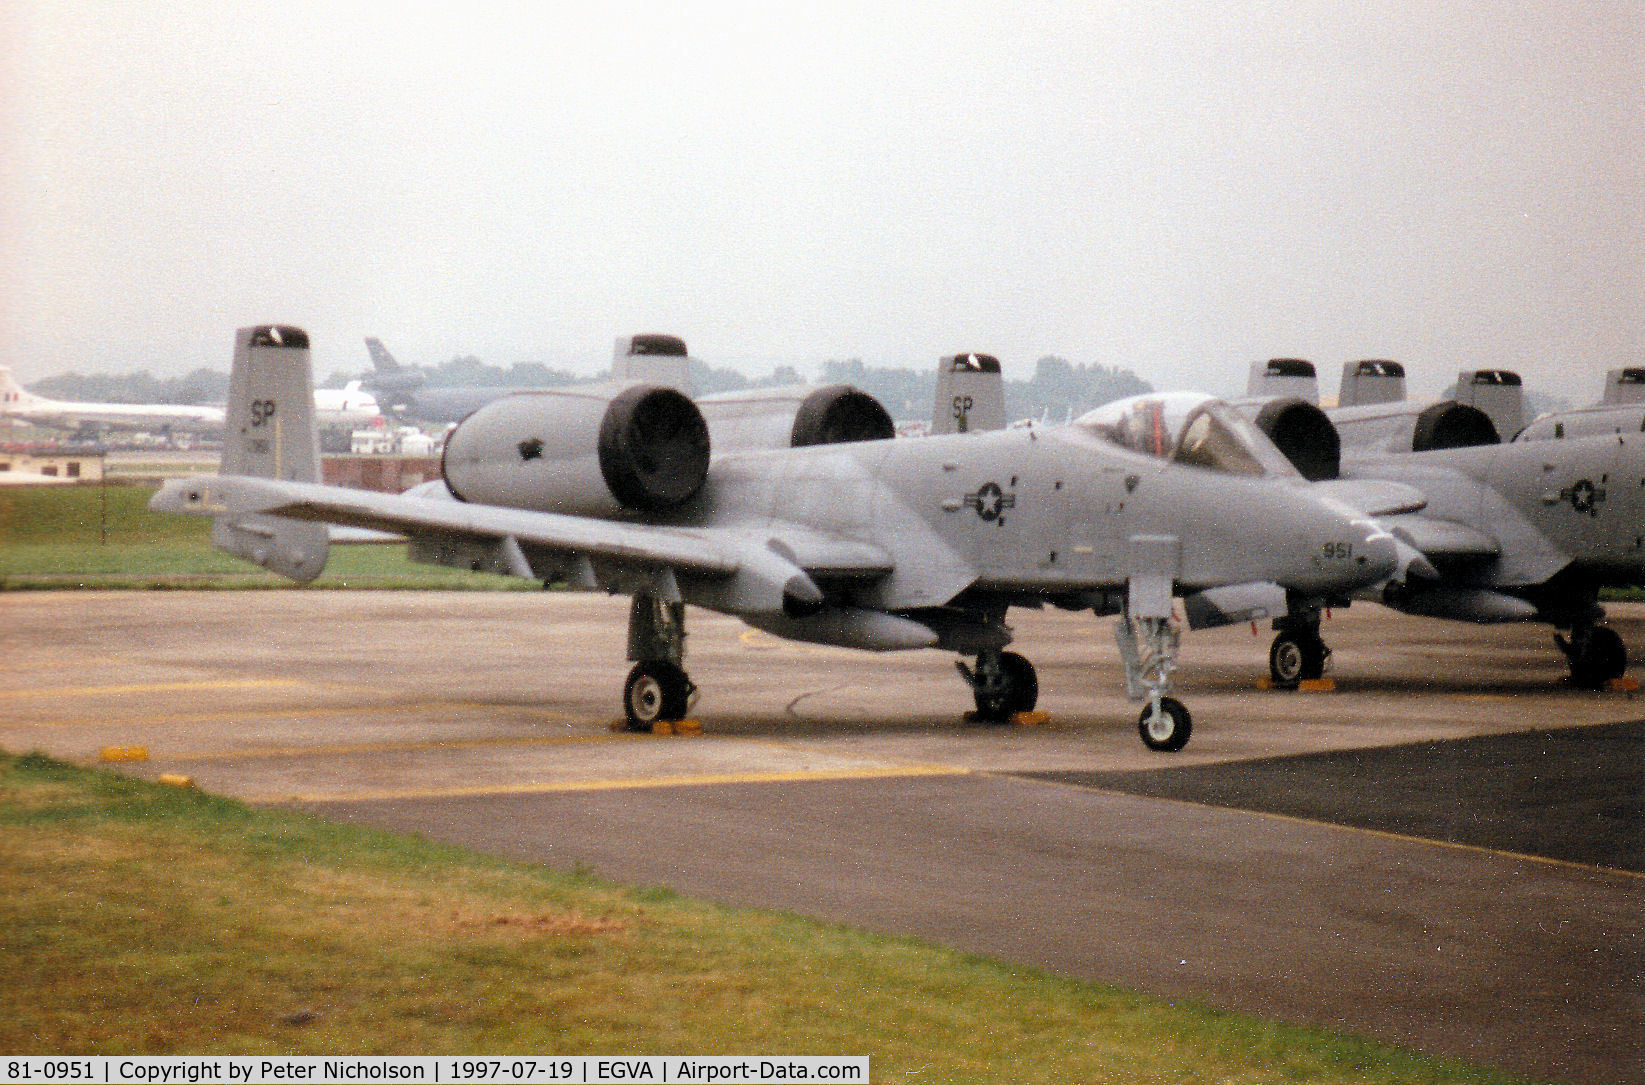 81-0951, 1981 Fairchild Republic A-10A Thunderbolt II C/N A10-0646, A-10A Thunderbolt, callsign Panther 11, of Spangdahlem's 81st Fighter Squadron/52nd Fighter Wing on the flight-line at the 1997 Intnl Air Tattoo at RAF Fairford.